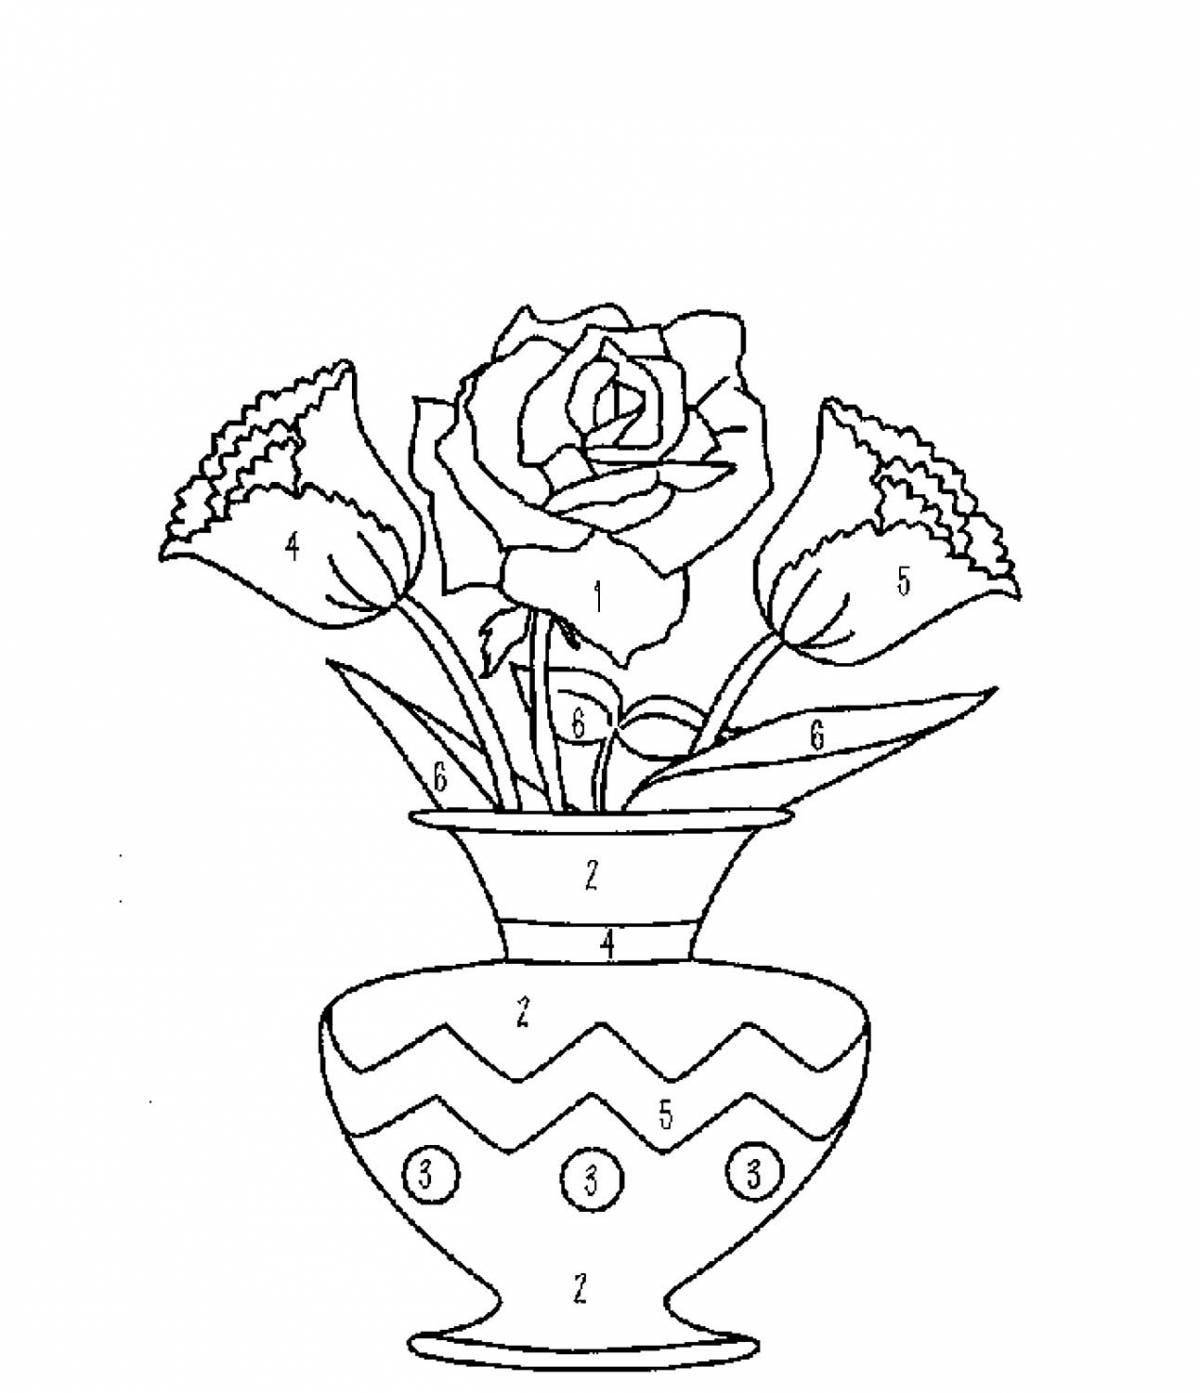 Coloring book shining vase of flowers